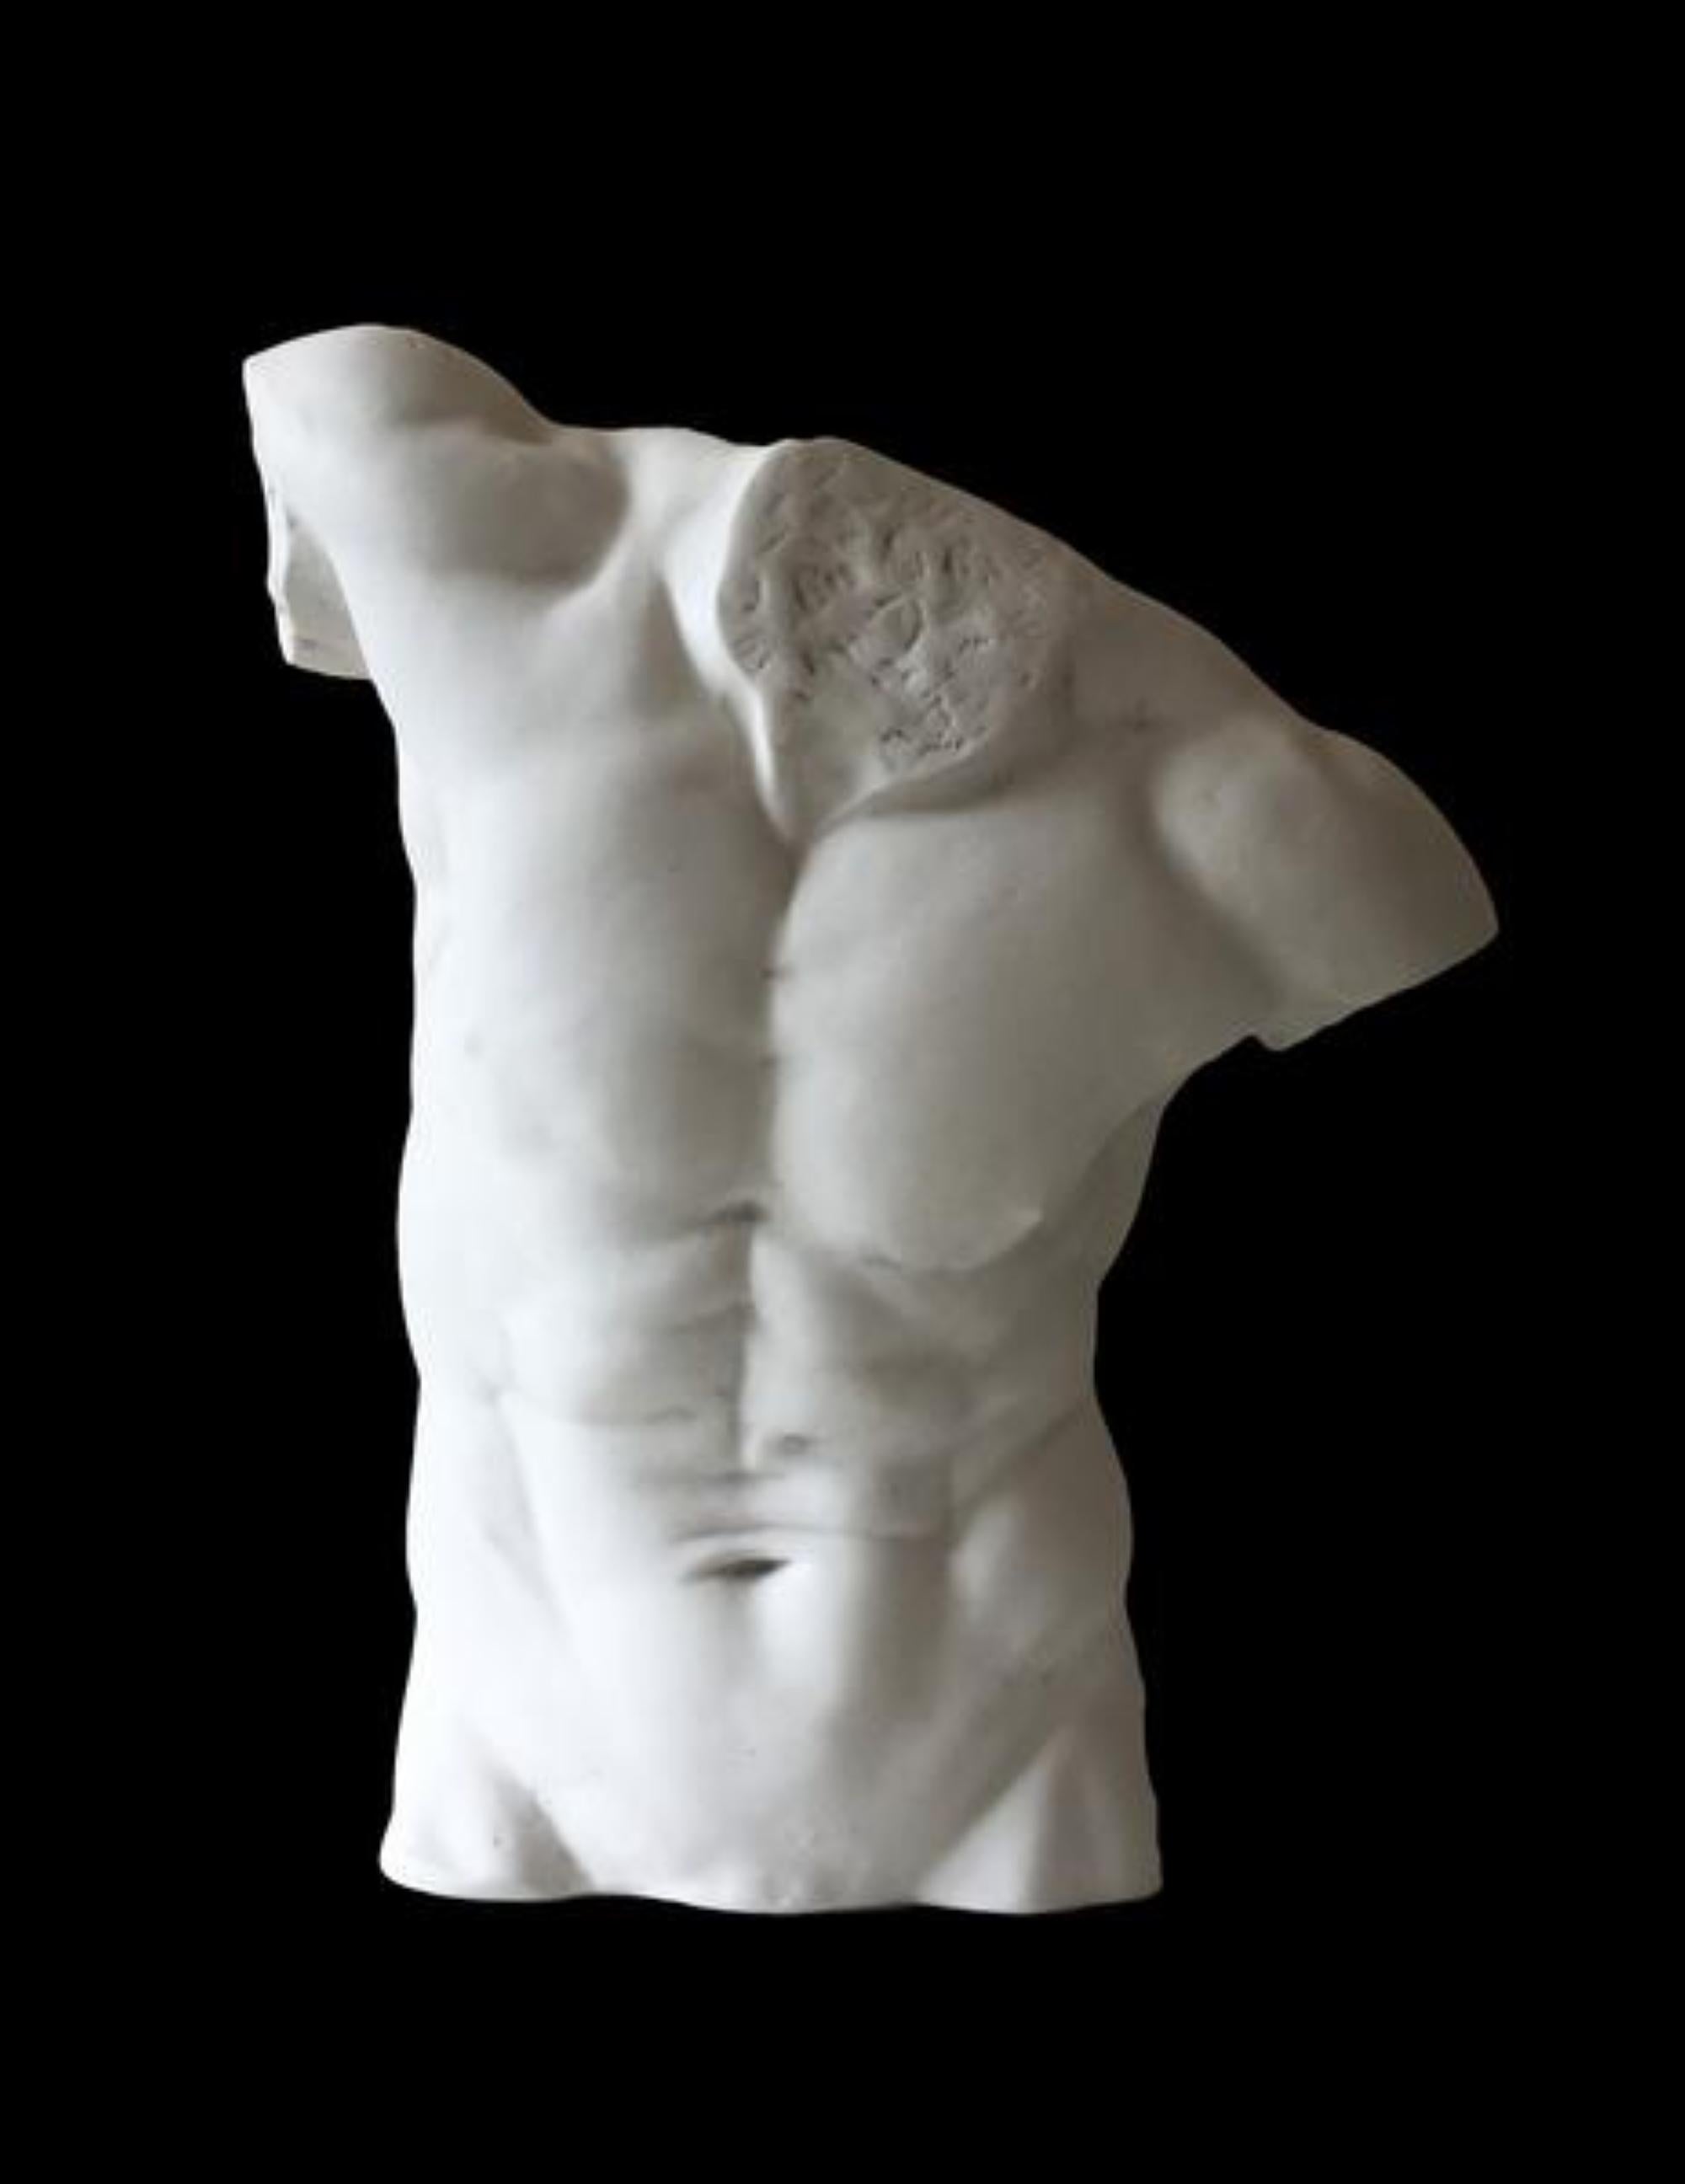 Large male torso statue resembling the classical movement of the famous Laocoön and Belvedere torso in the Vatican Museums.

Stunningly well executed, this large sculpture of a naked male torso has incredible details at the back and front muscles,